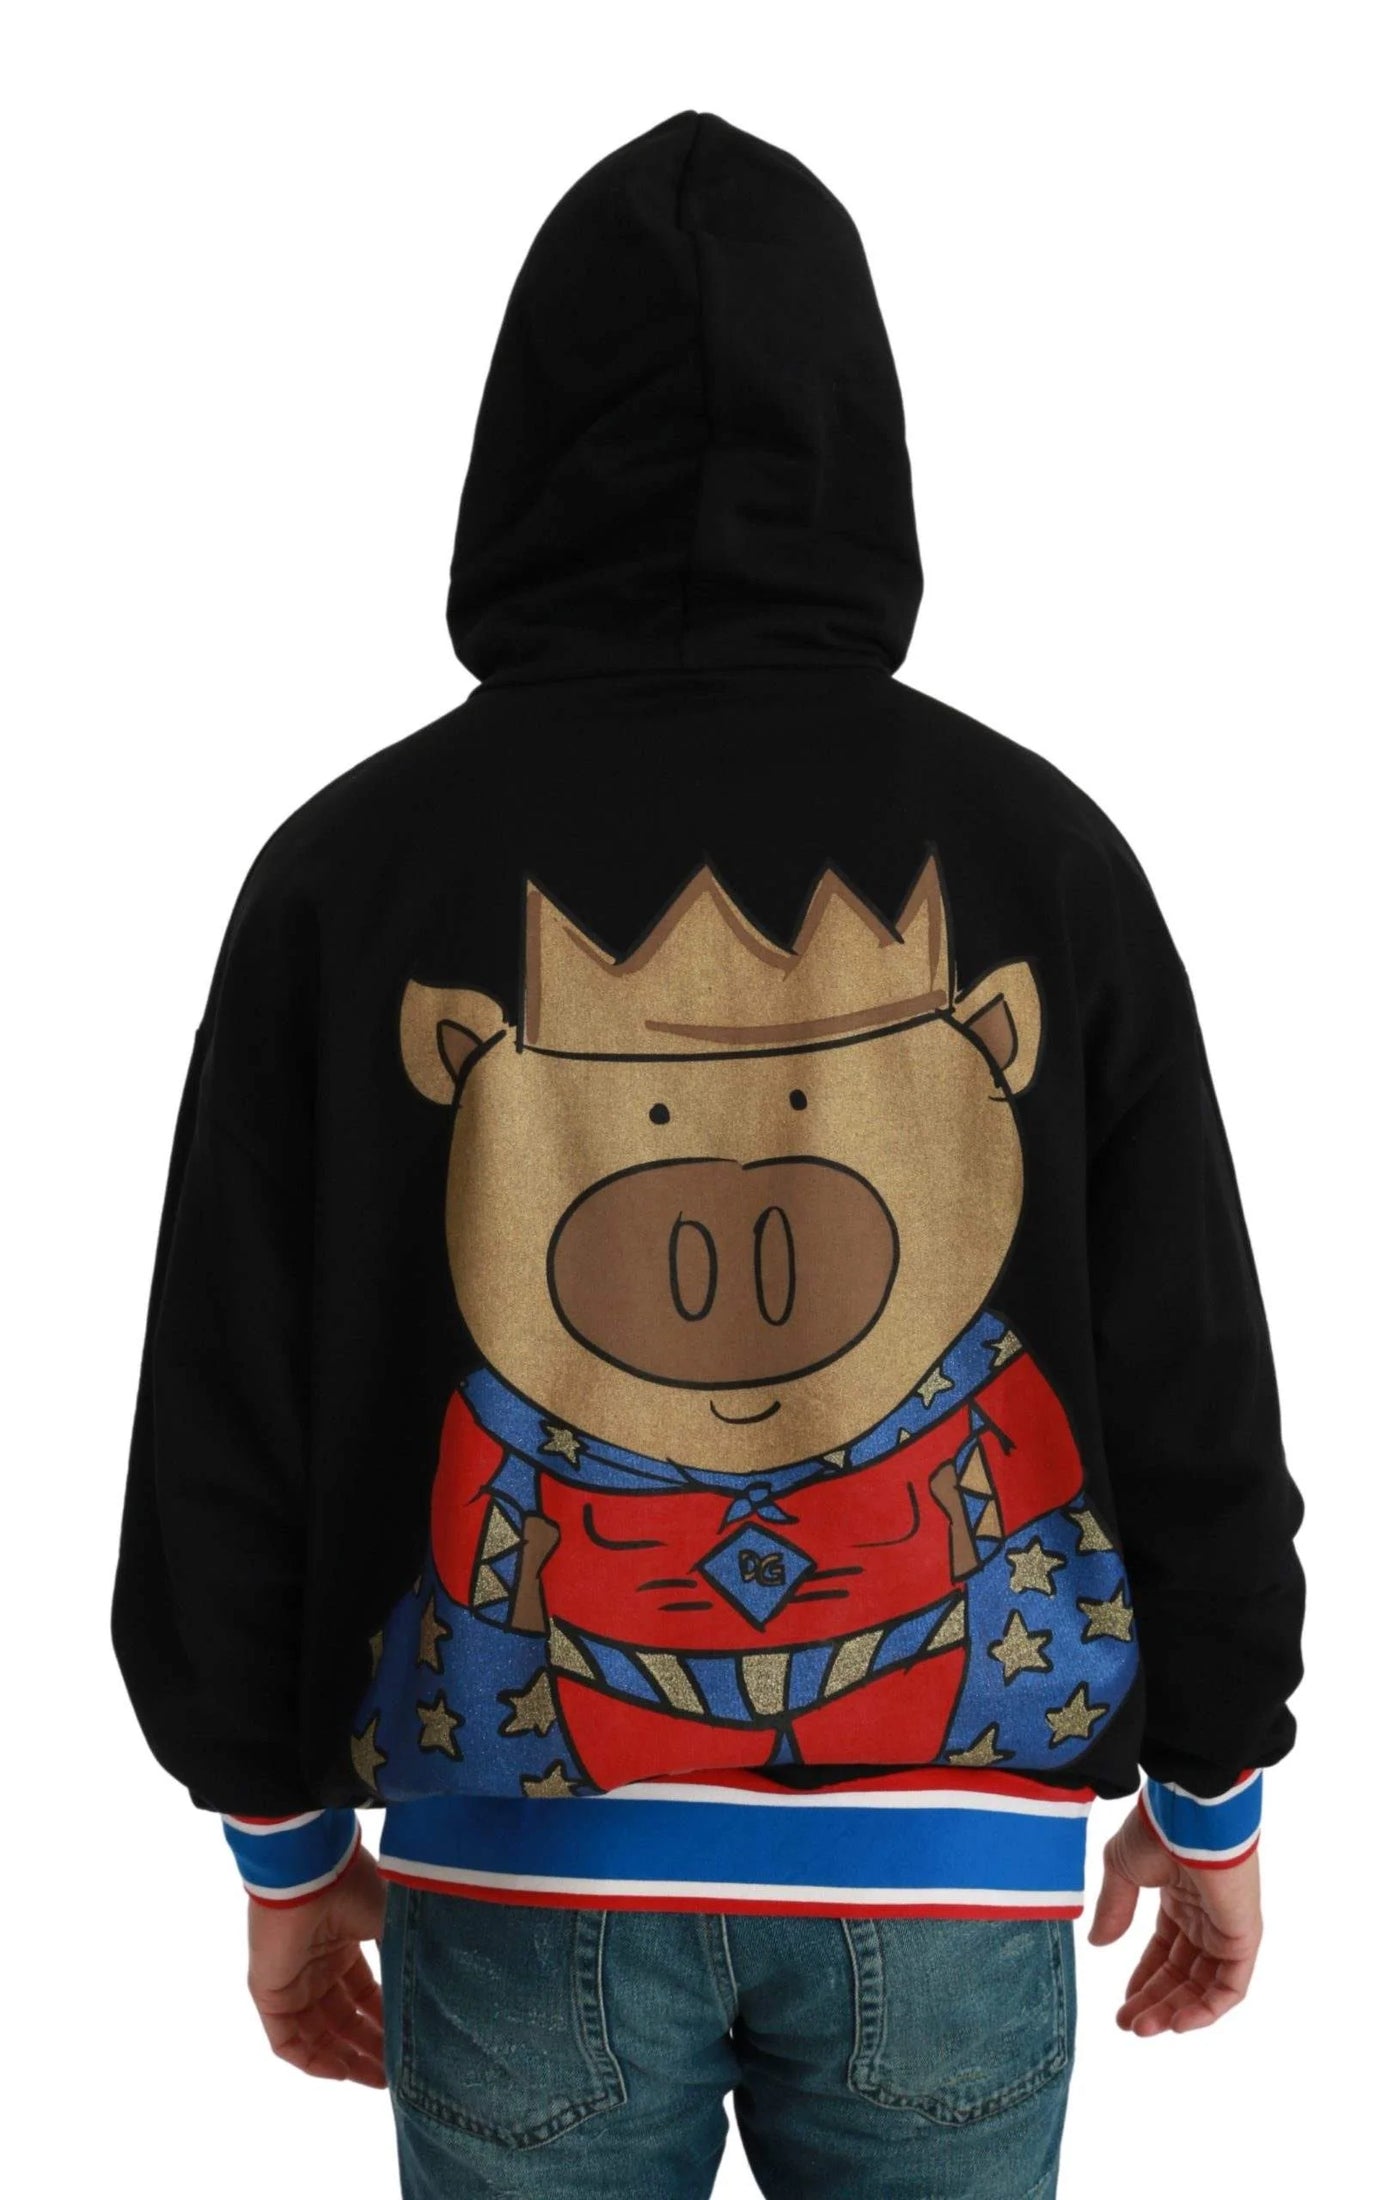 Dolce & Gabbana  Black Sweater Pig of the Year Hooded #men, Black, Brand_Dolce & Gabbana, Catch, Dolce & Gabbana, feed-agegroup-adult, feed-color-black, feed-gender-male, feed-size-IT44 | XS, feed-size-IT46 | S, feed-size-IT50 | L, feed-size-IT52 | L, feed-size-IT54 | XL, feed-size-IT56 | XXL, Gender_Men, IT44 | XS, IT46 | S, IT50 | L, IT52 | L, IT54 | XL, IT56 | XXL, Kogan, Men - New Arrivals, Sweaters - Men - Clothing at SEYMAYKA